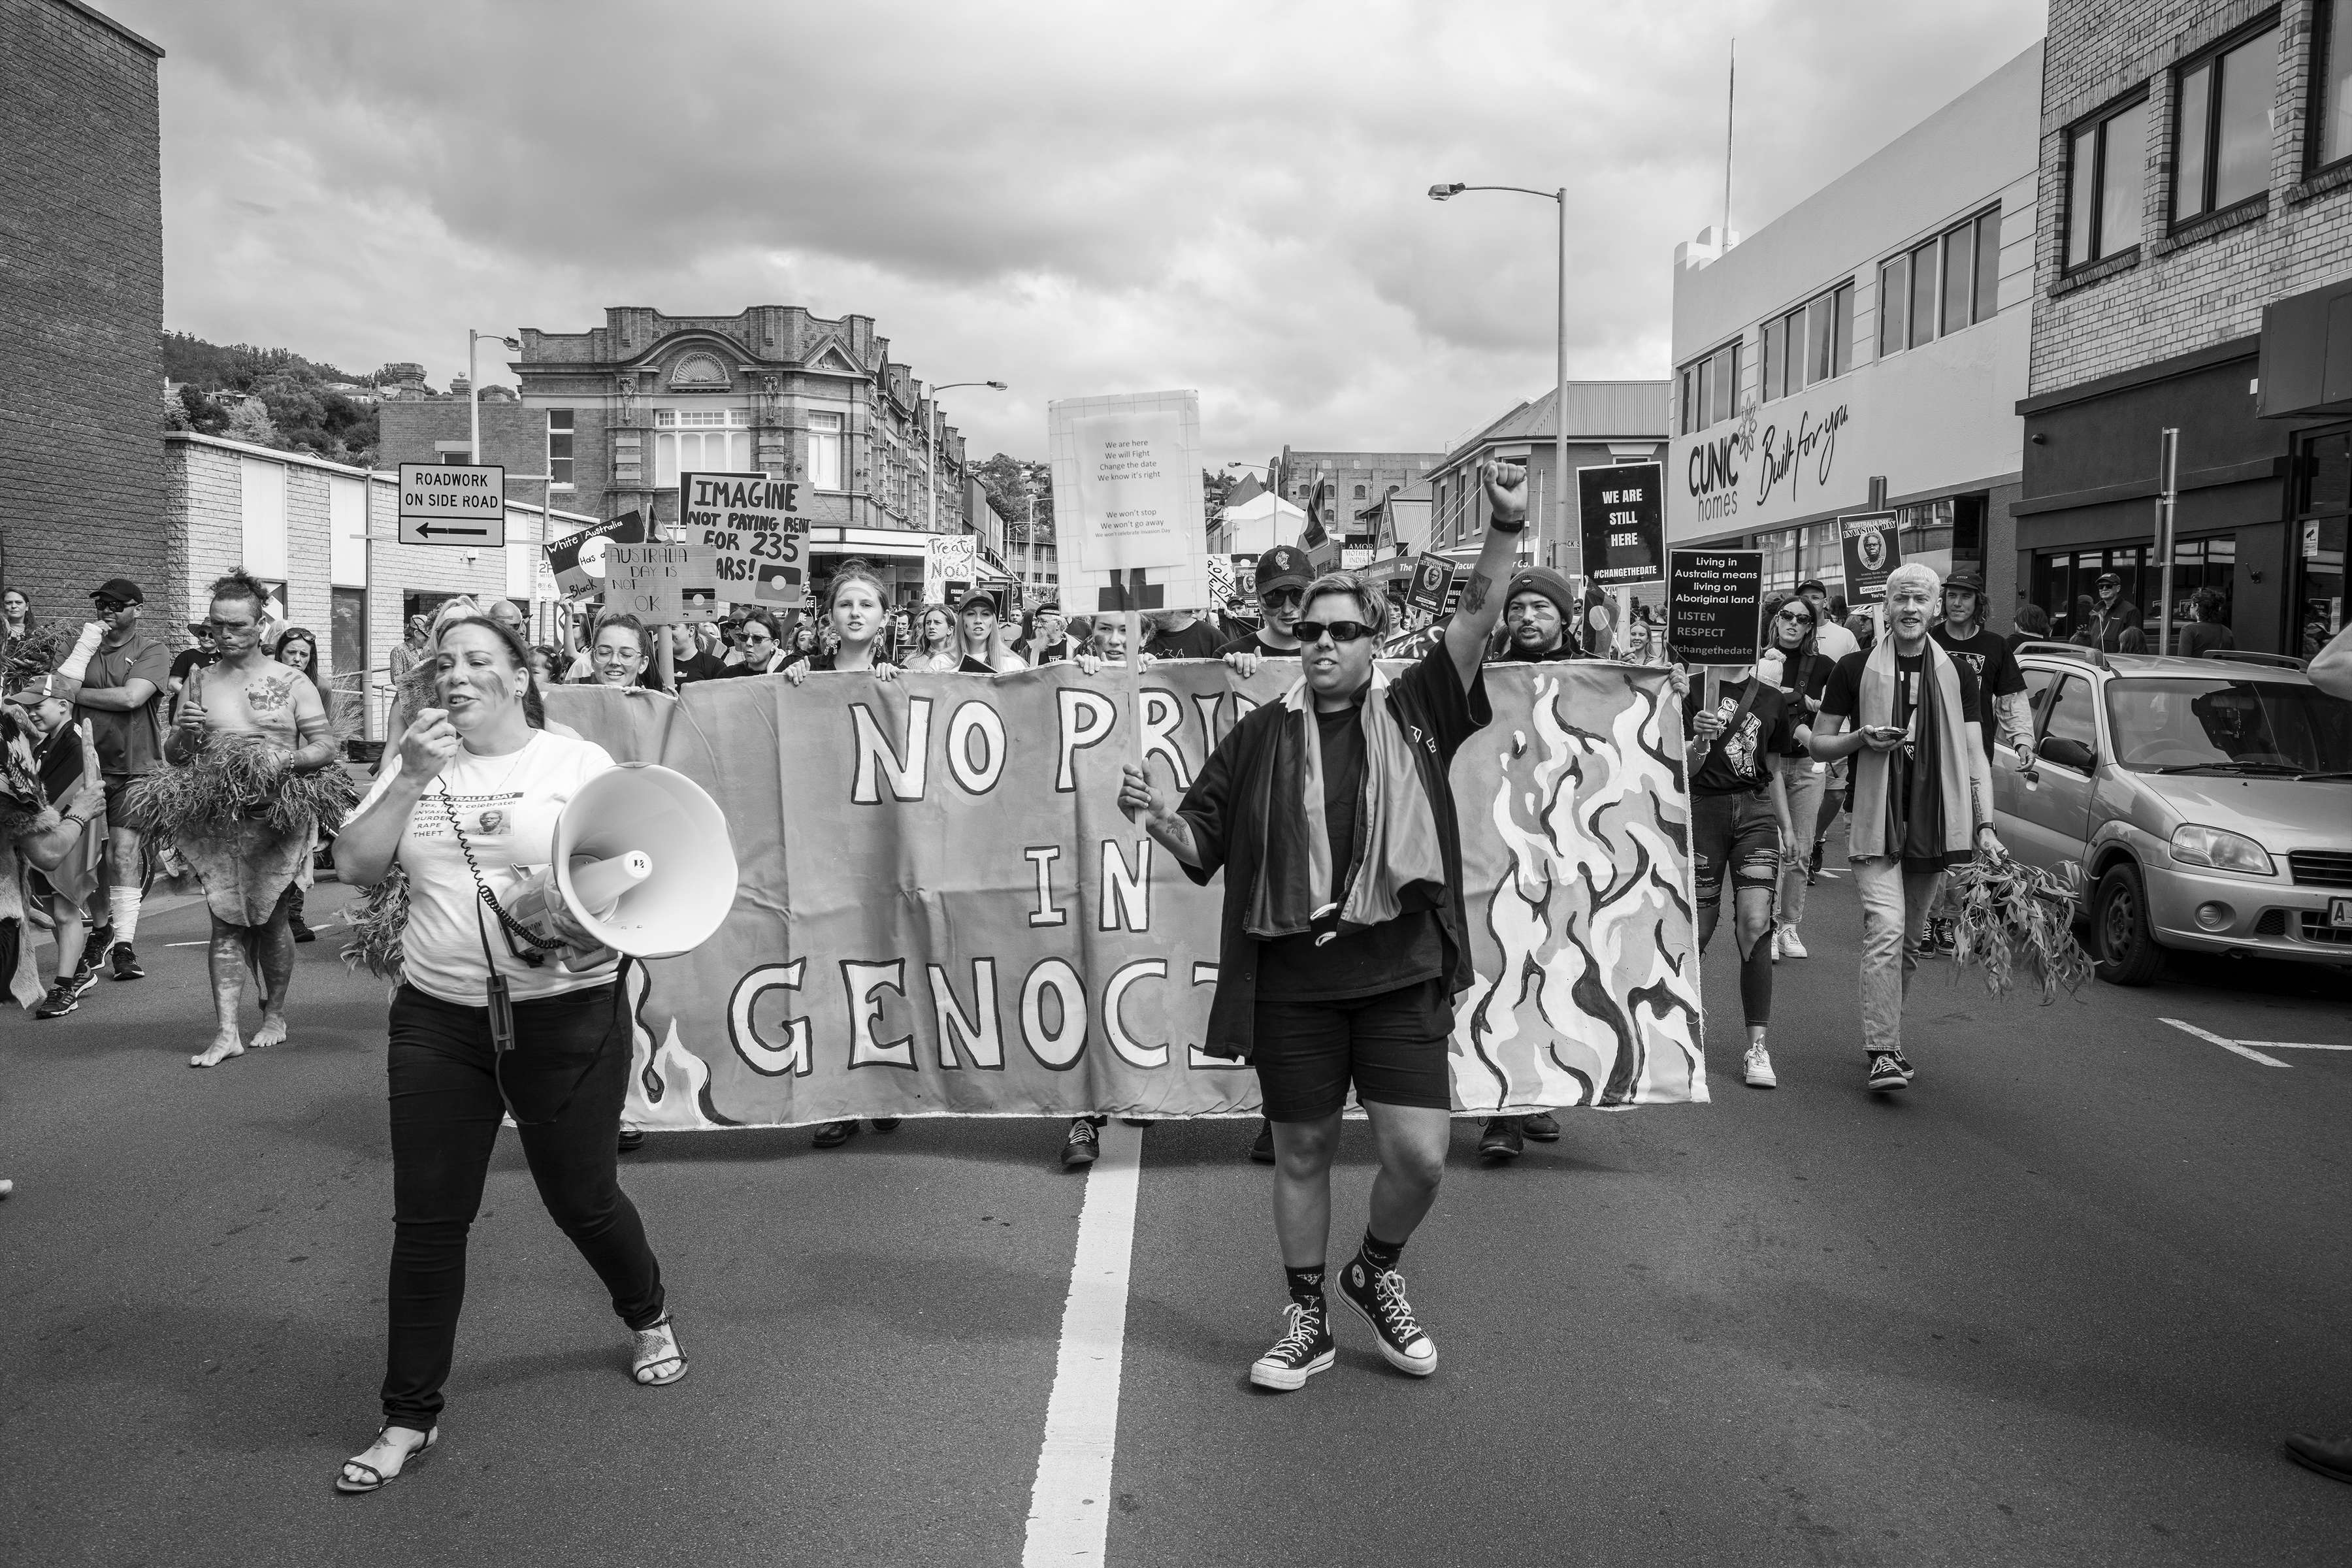 An image of a group of Aboriginal protesters walking and chanting down Elizabeth Street in the city of nipaluna/Hobart. The lead protestor has a megaphone. The main protest sign reads No pride in genocide.